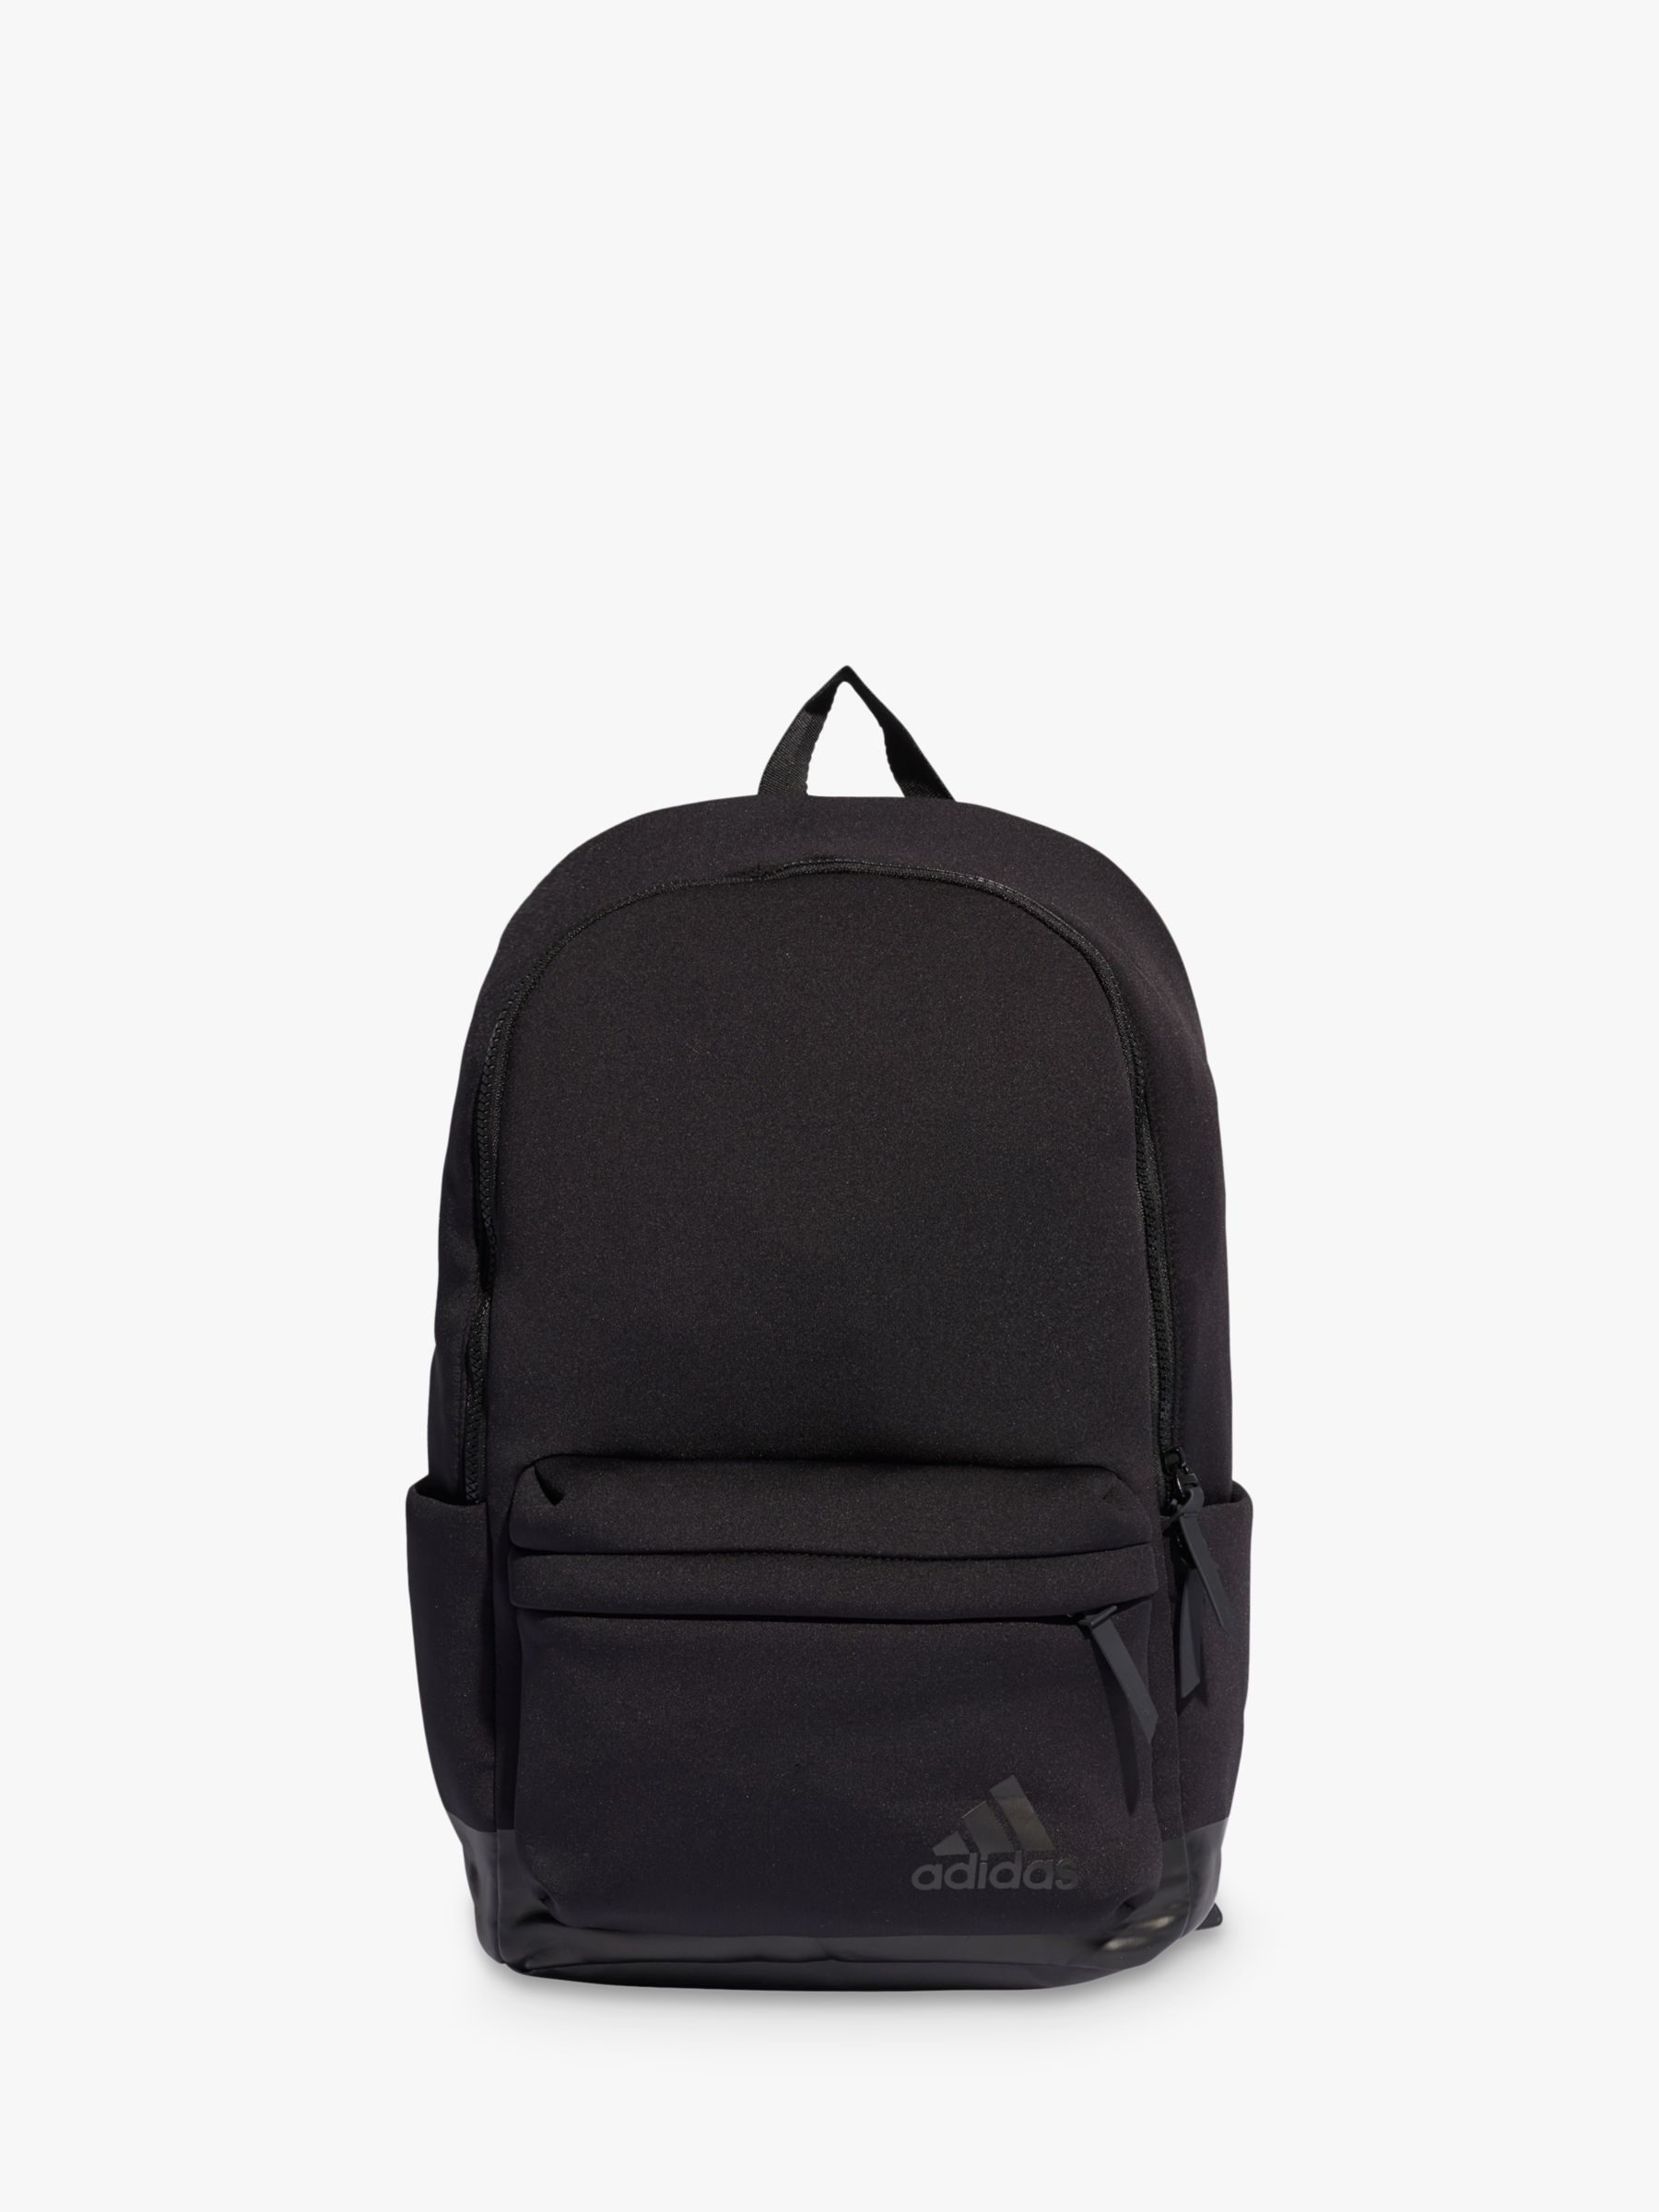 adidas Favourite Backpack, Black at 